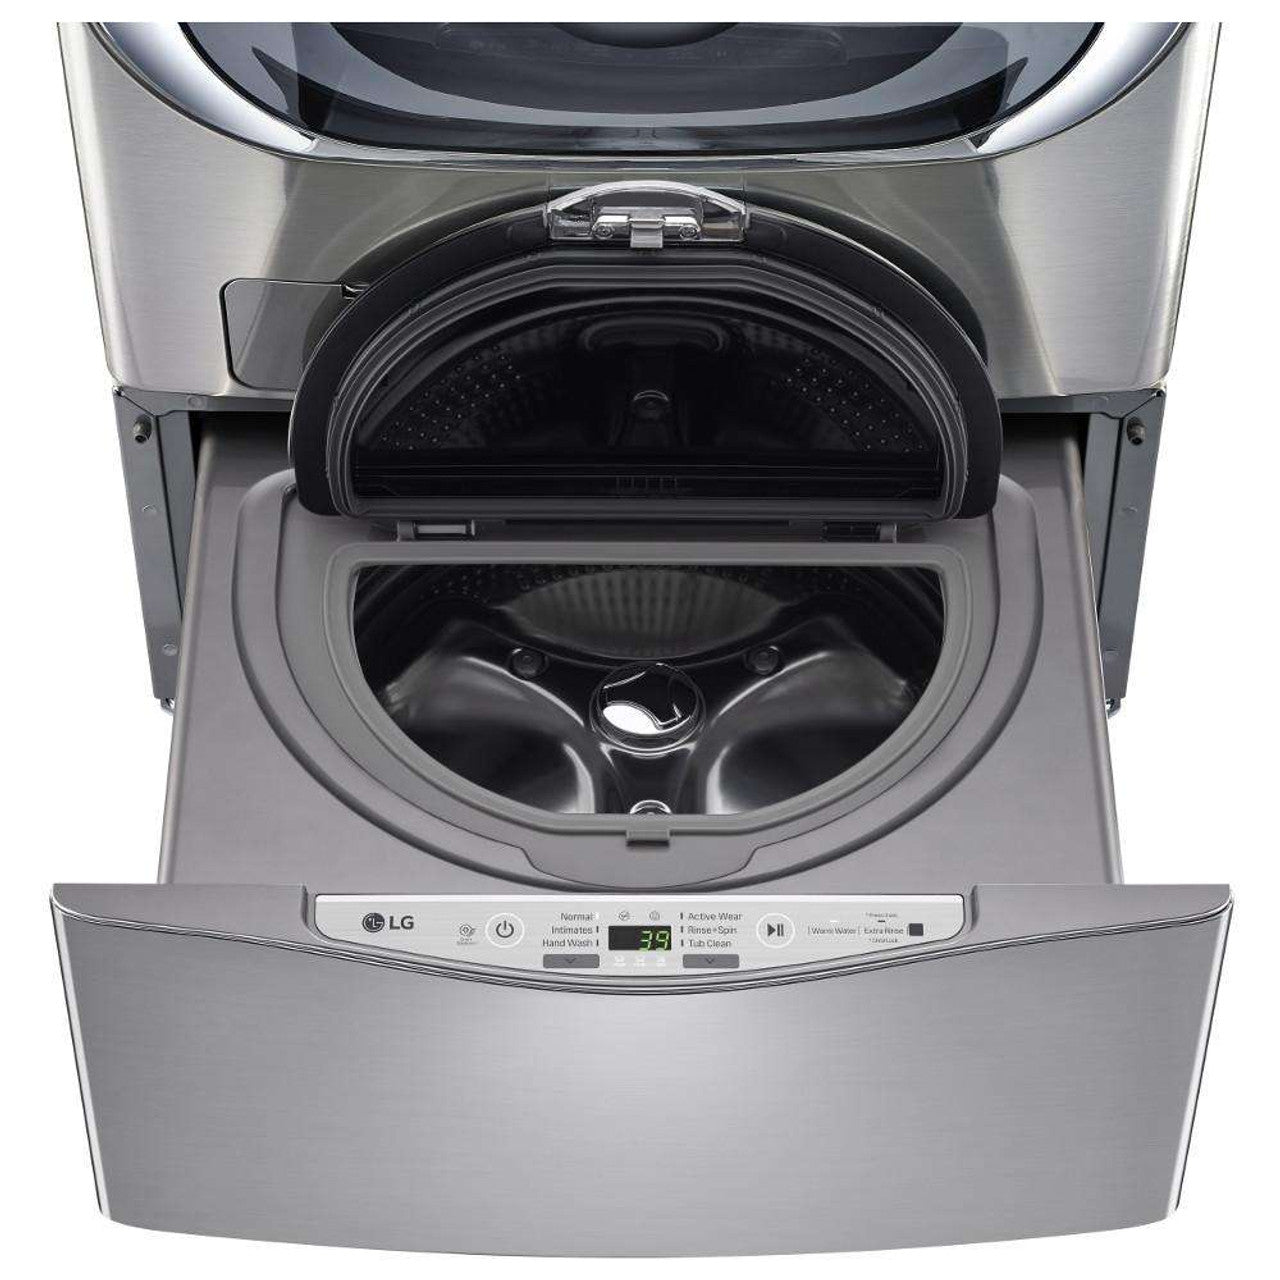 LG - SideKick 1.0 Cu. Ft. High-Efficiency Top Load Pedestal Washer with 3-Motion Technology - Graphite Steel, WD200CV, [FB108] MSRP: $779.00 - FINAL: